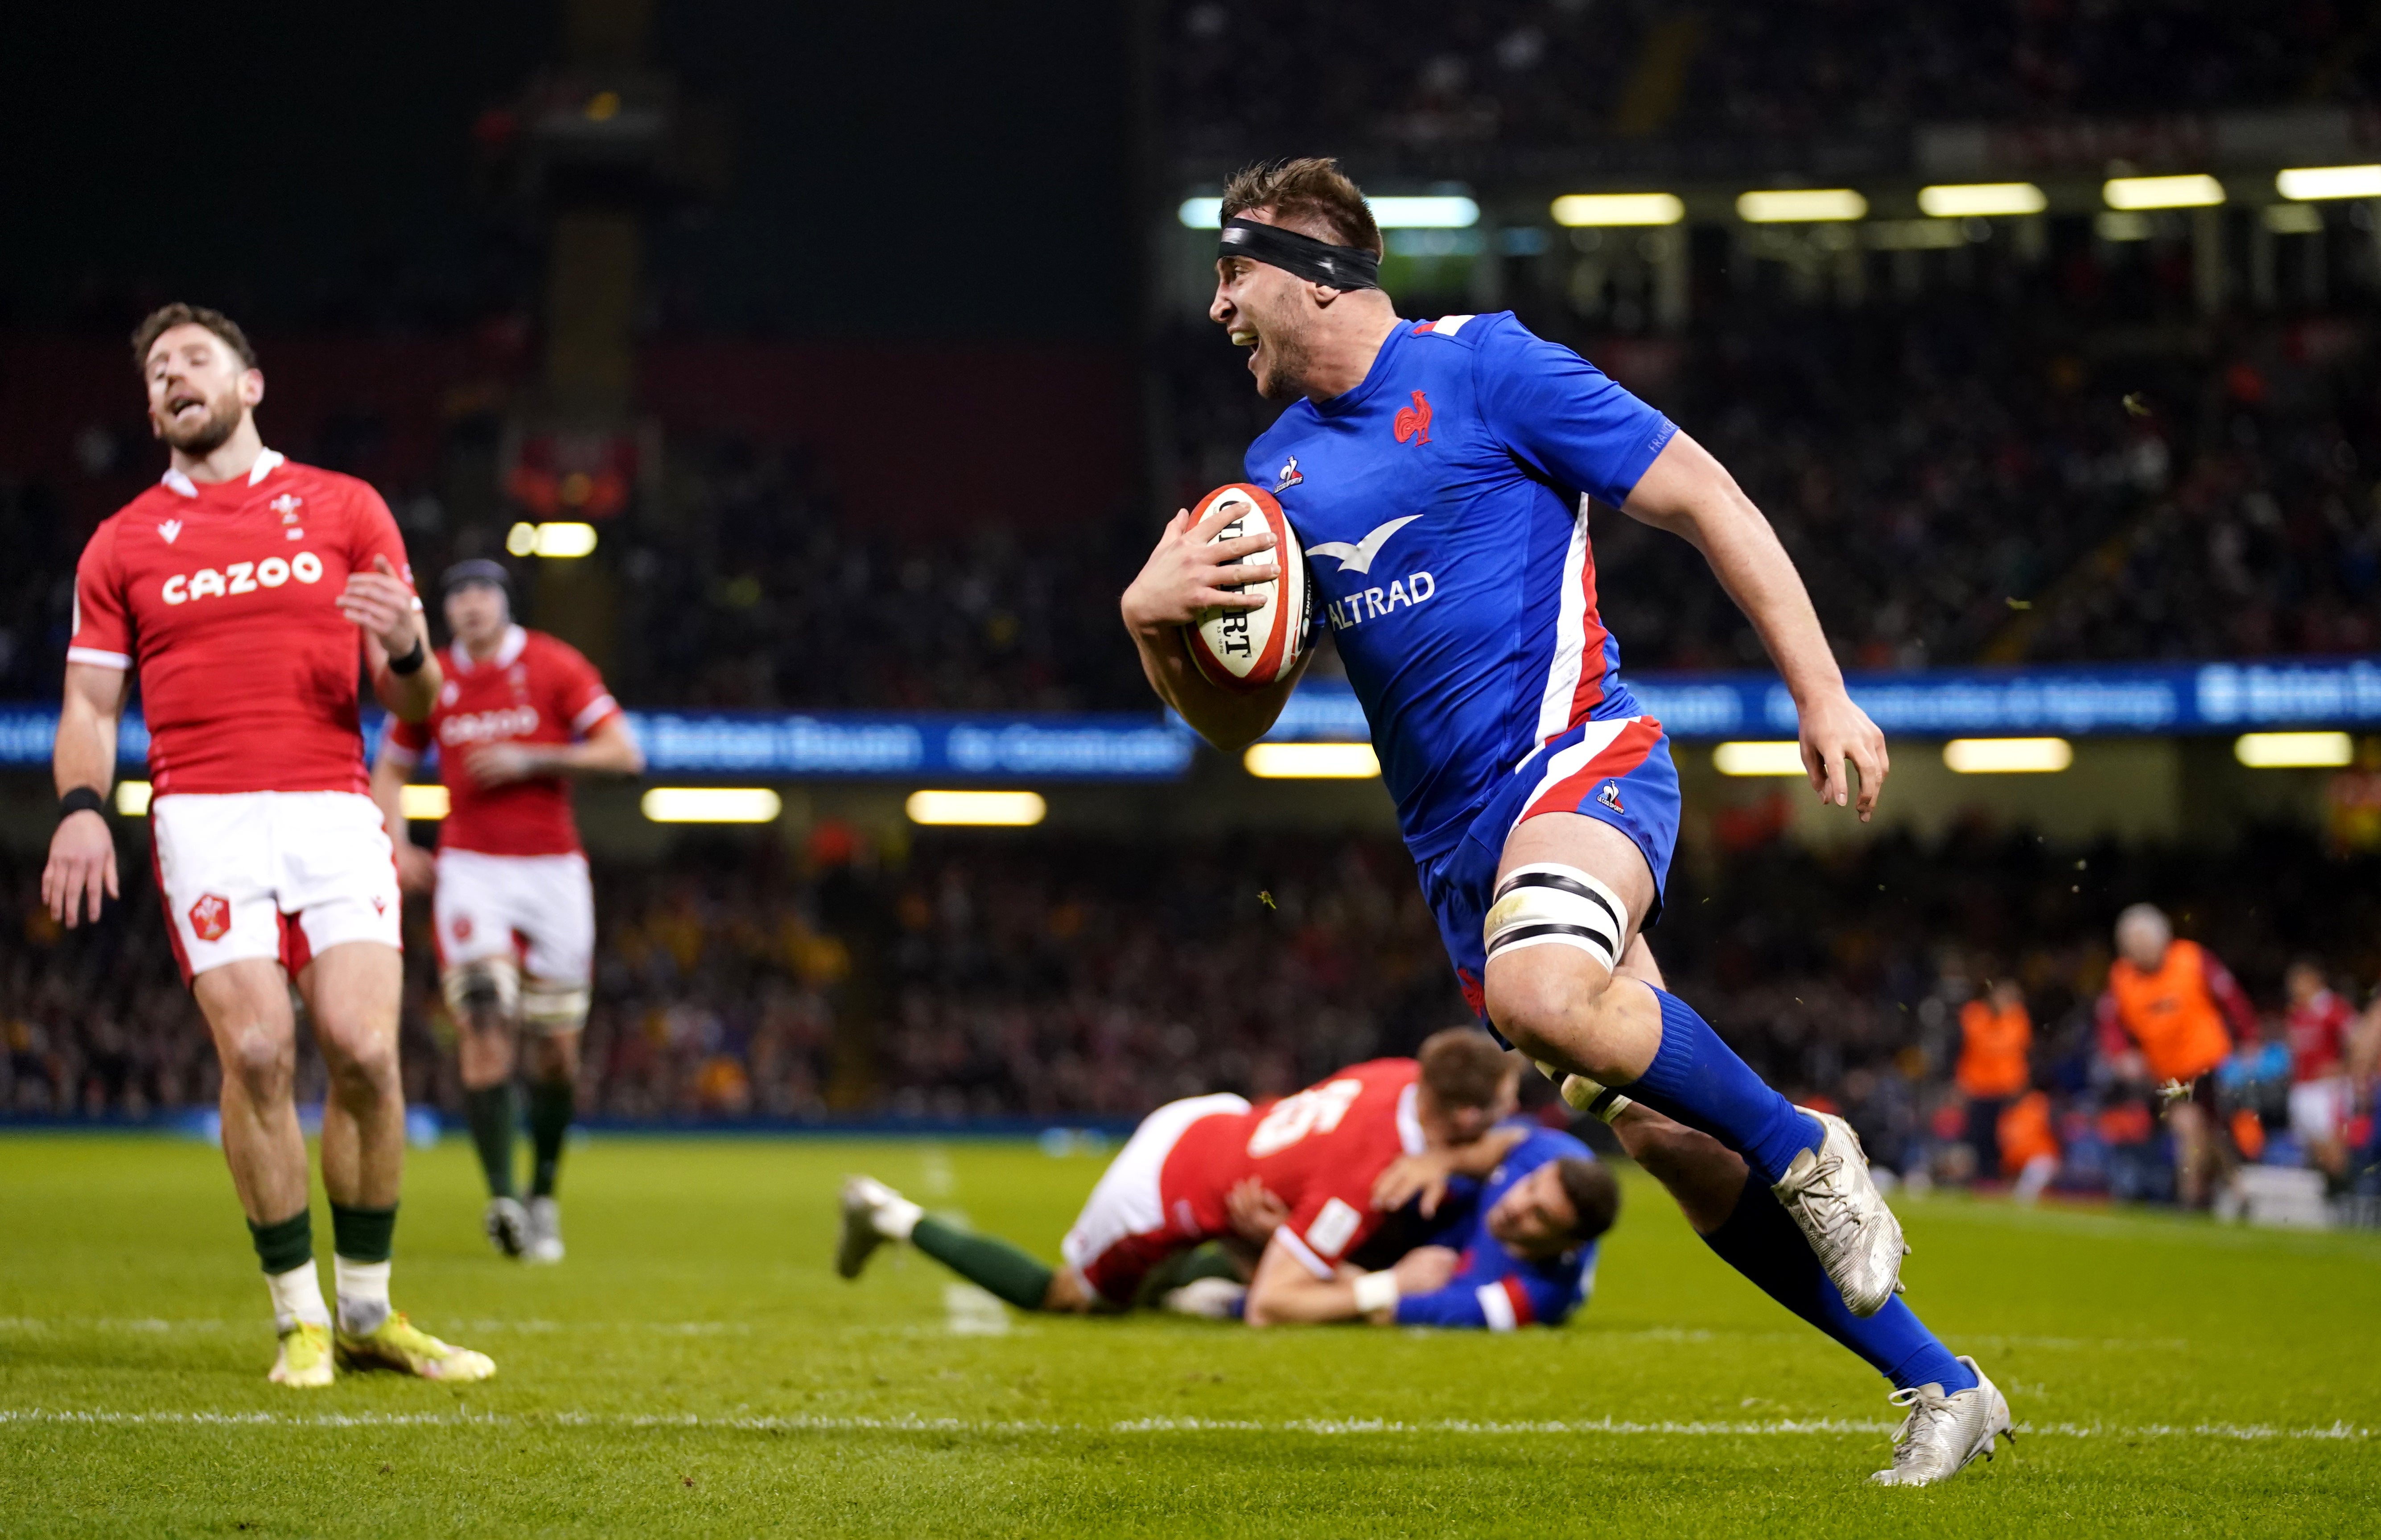 France are top of the Six Nations table heading into the final round